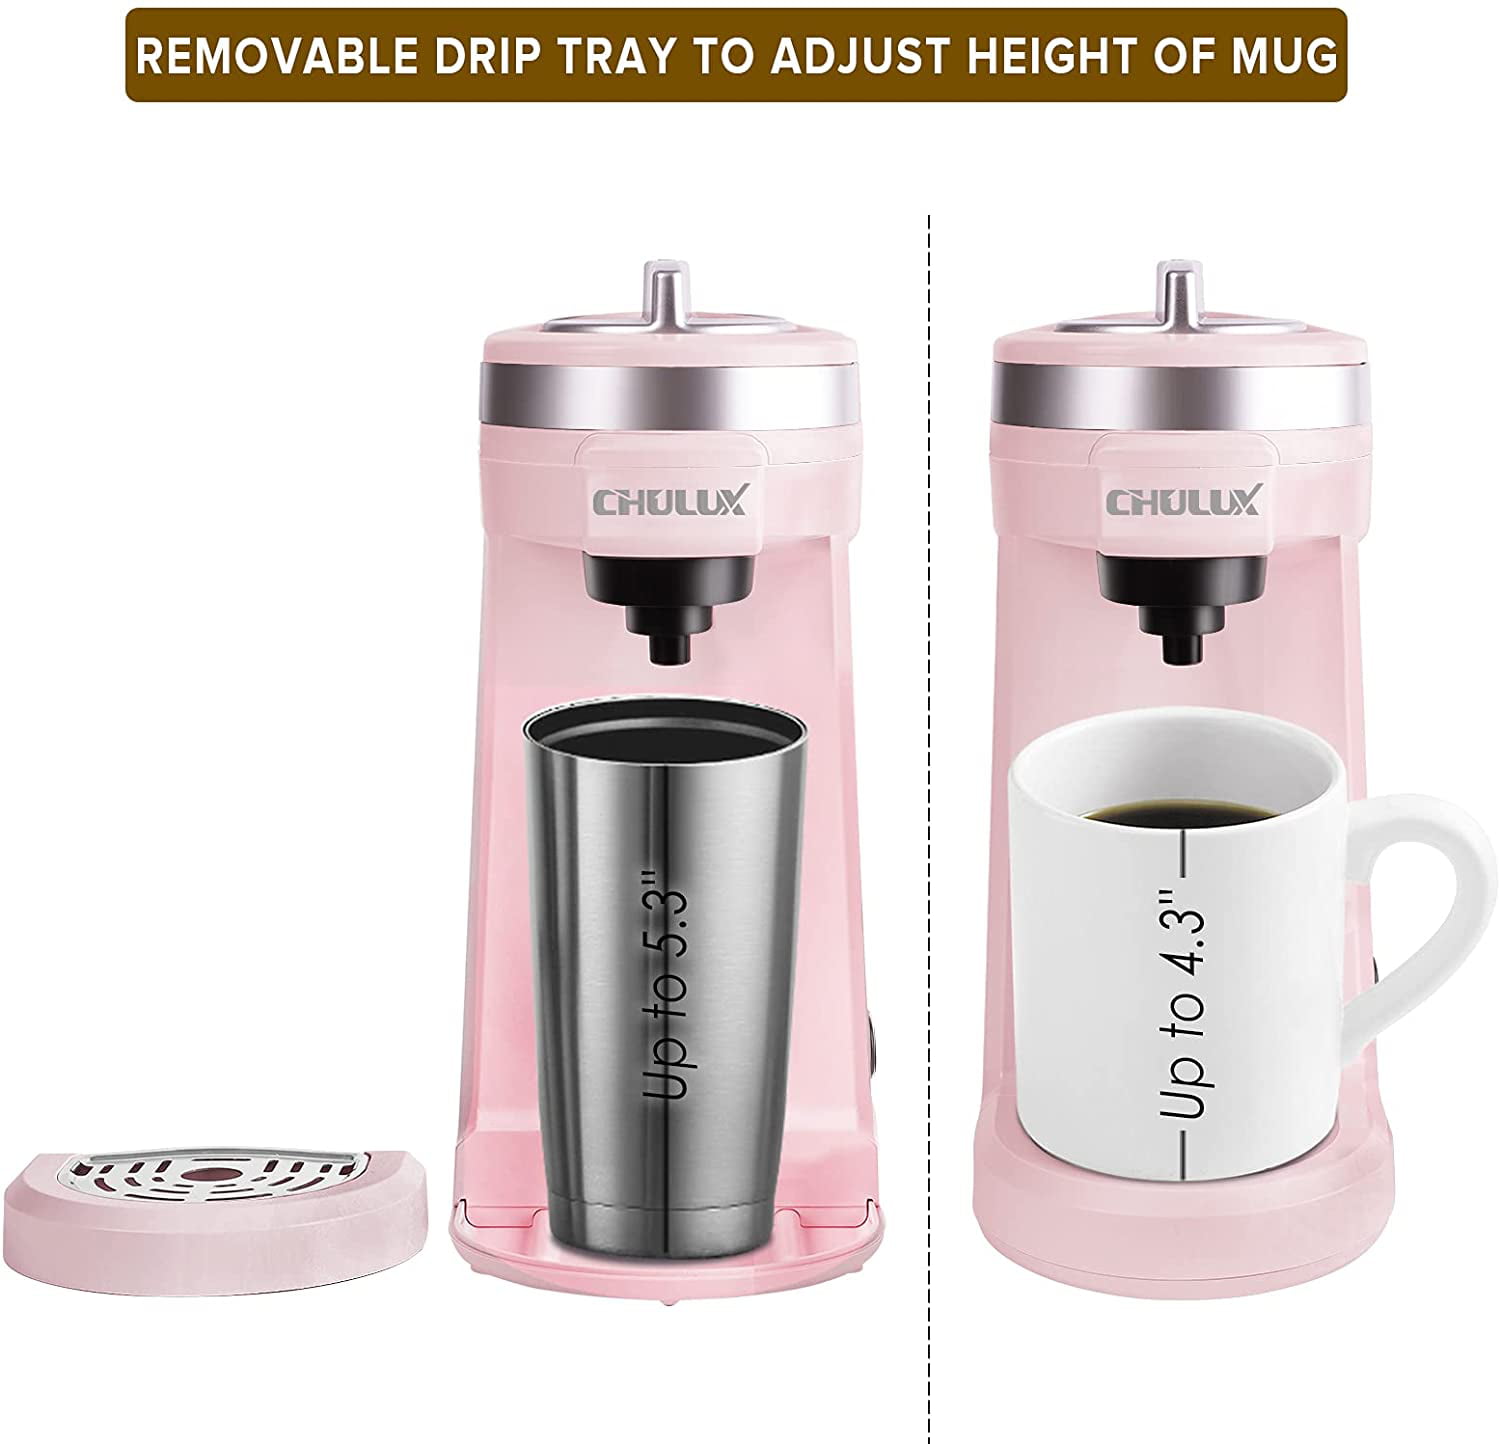 Brew Delicious Coffee In Seconds With Chulux Upgrade Single Serve Coffee  Maker - Fast Brewing, Auto Shut-off, And One-button Operation - Temu